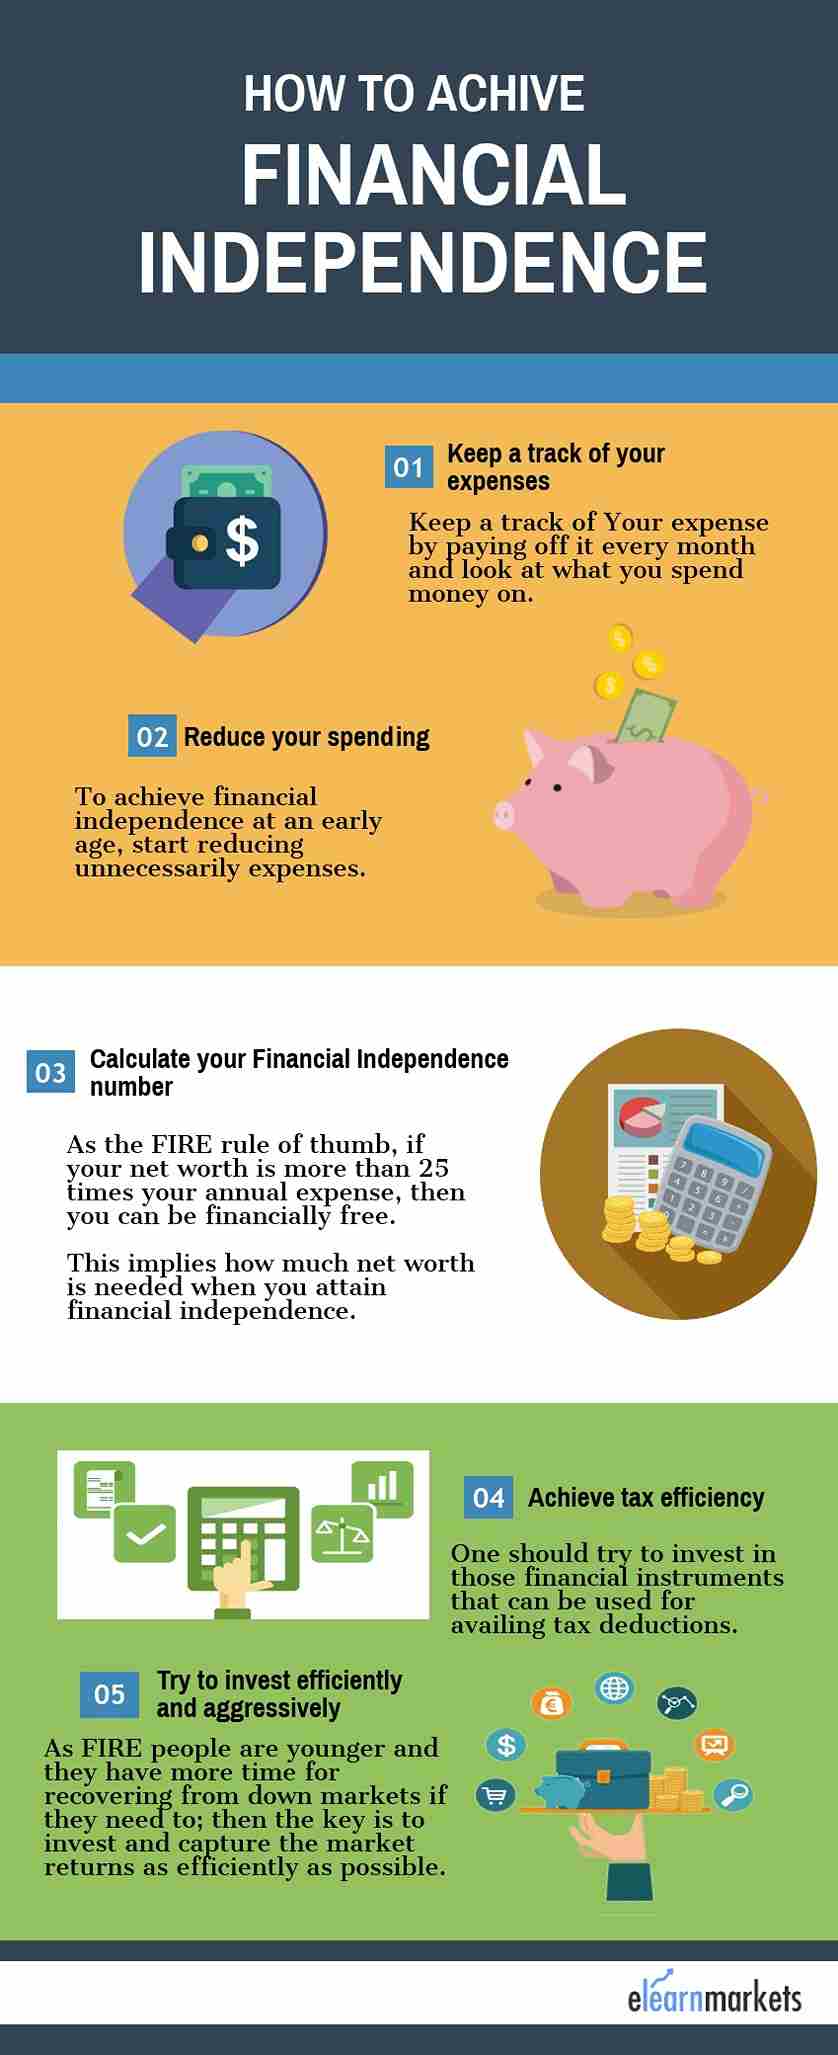 how to achive financial independence